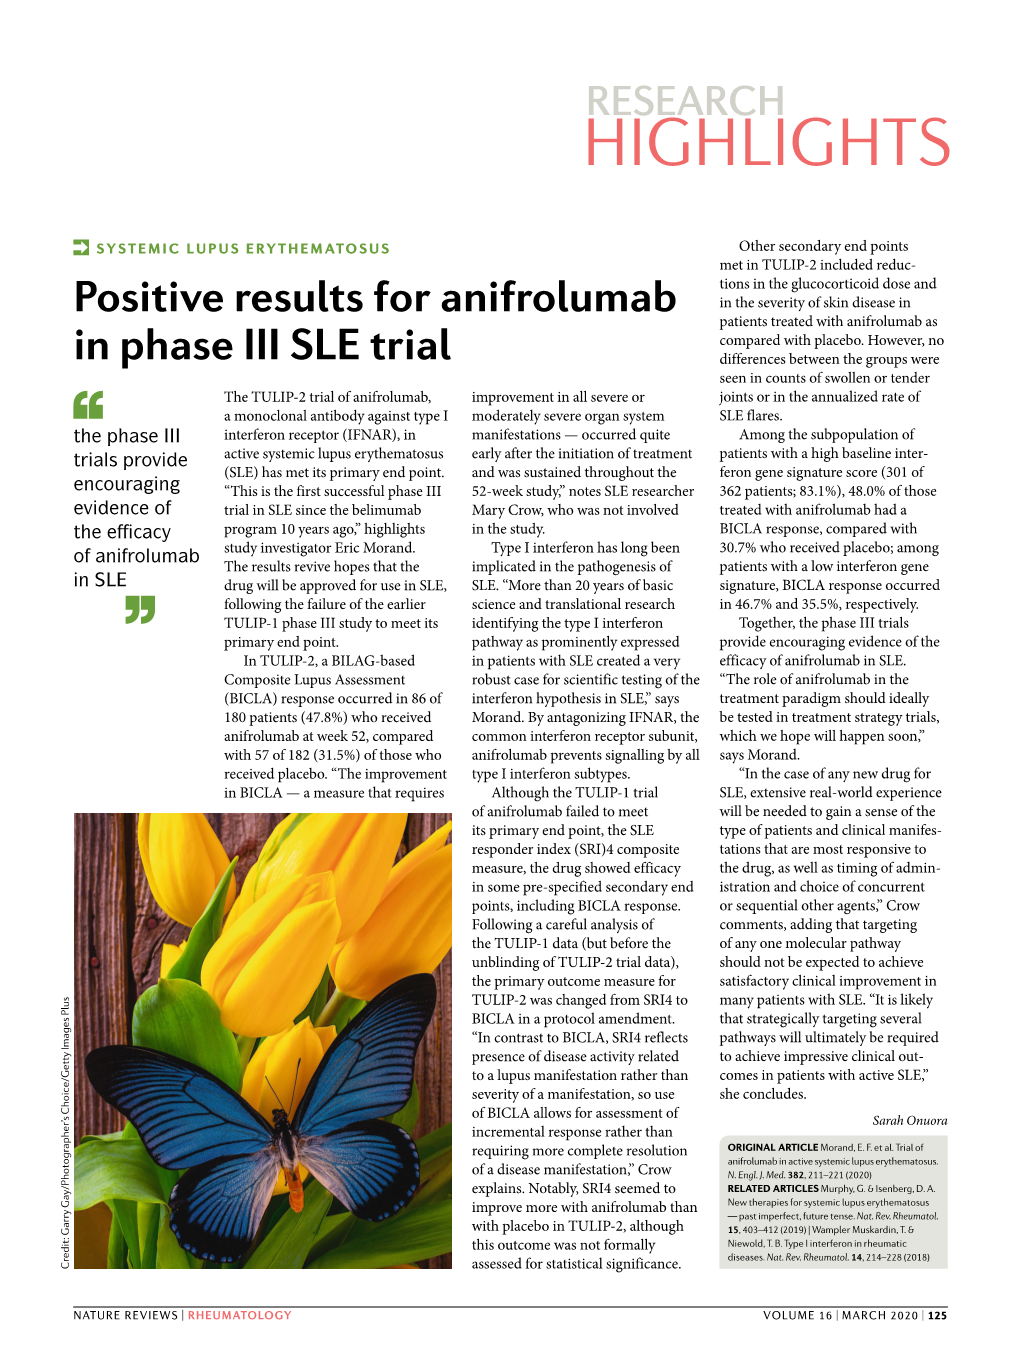 Positive Results for Anifrolumab in Phase III SLE Trial